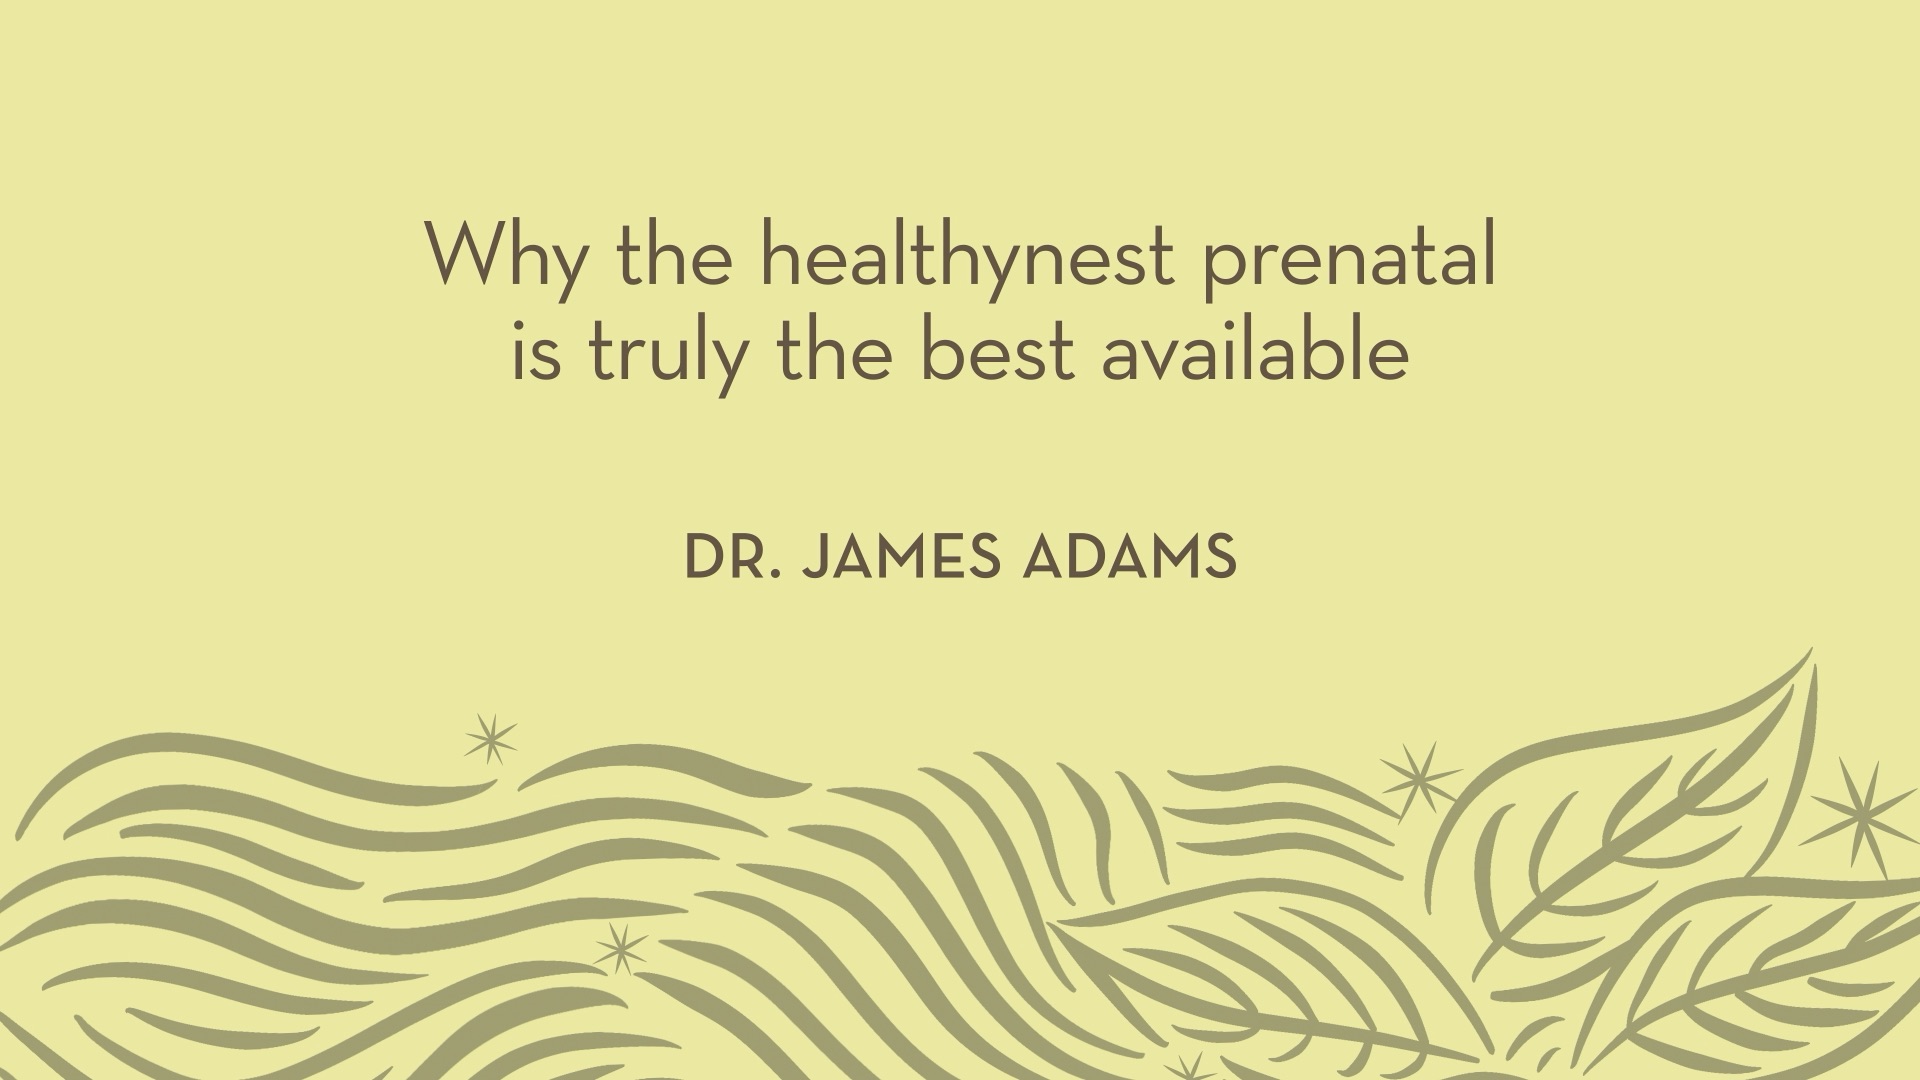 Dr. Adams | Why the healthynest prenatal is truly the best available